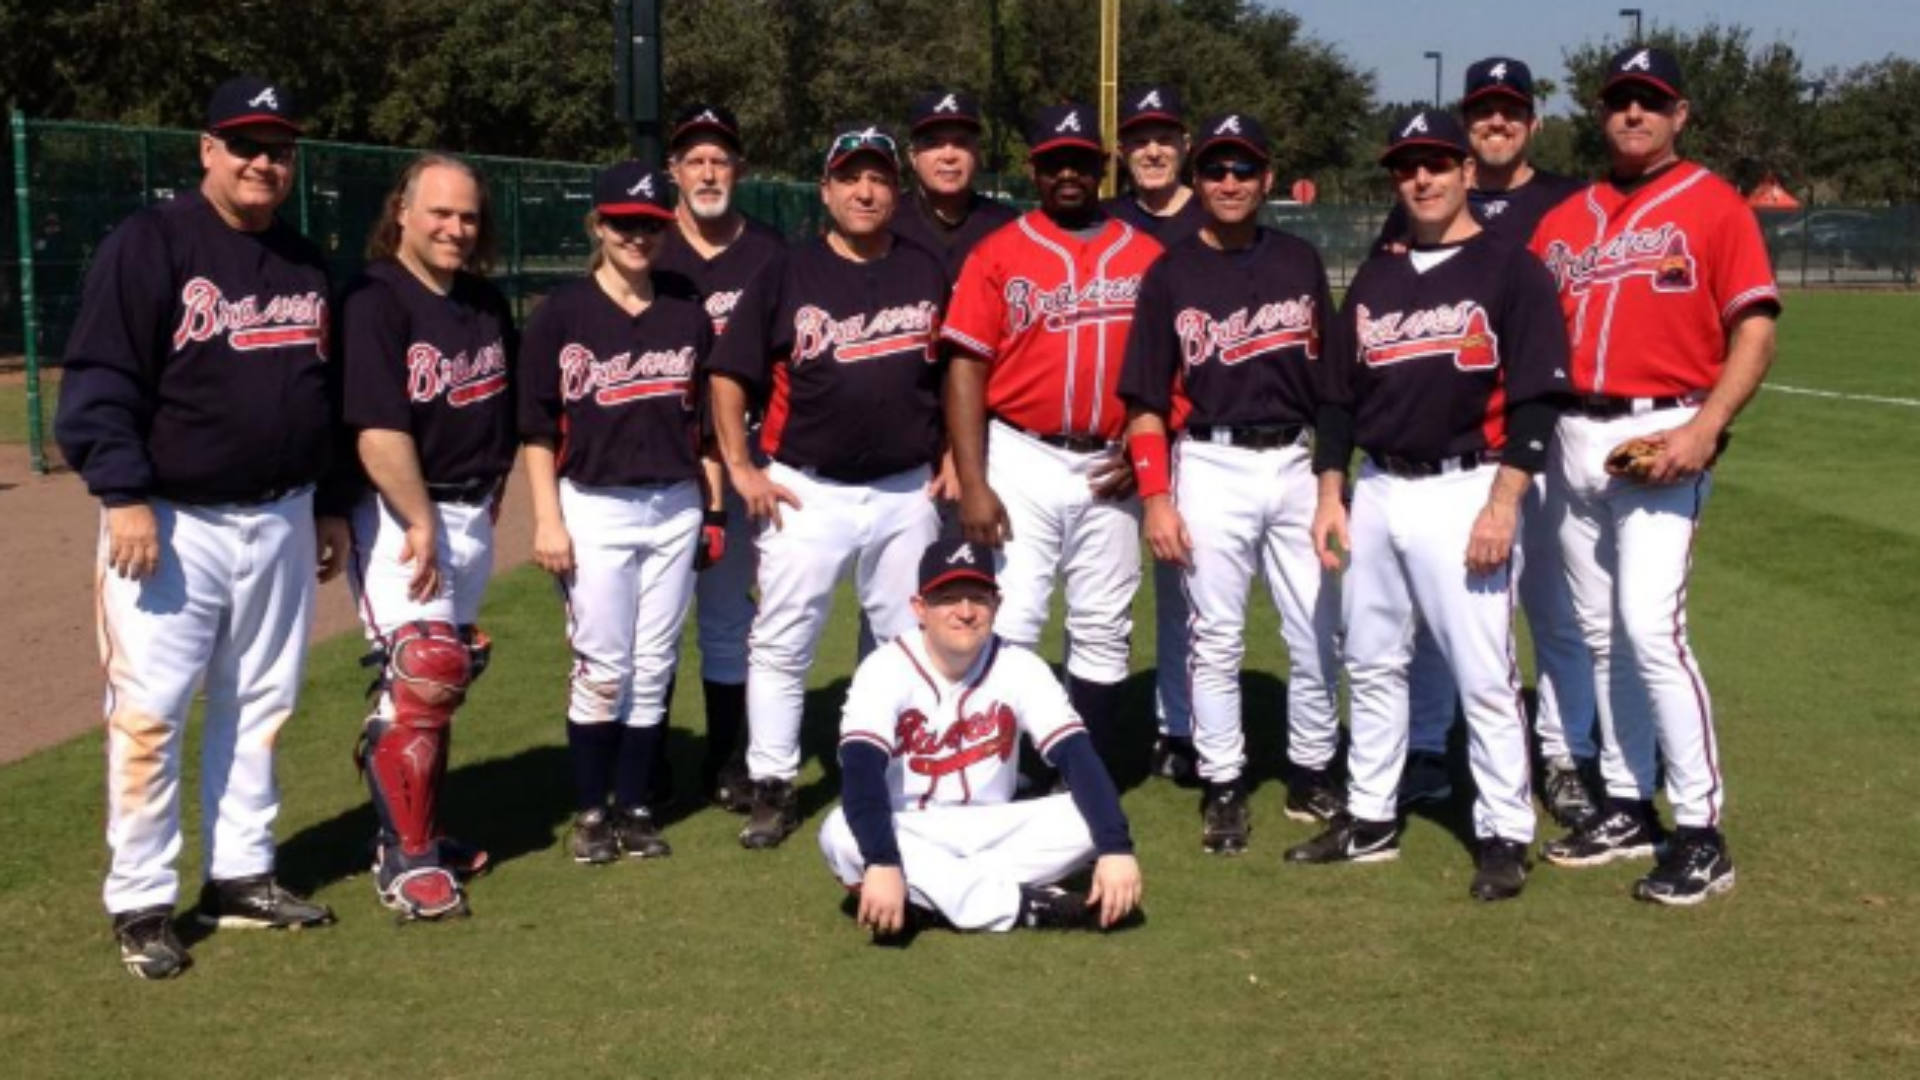 10 things you learn at an MLB fantasy camp Sporting News